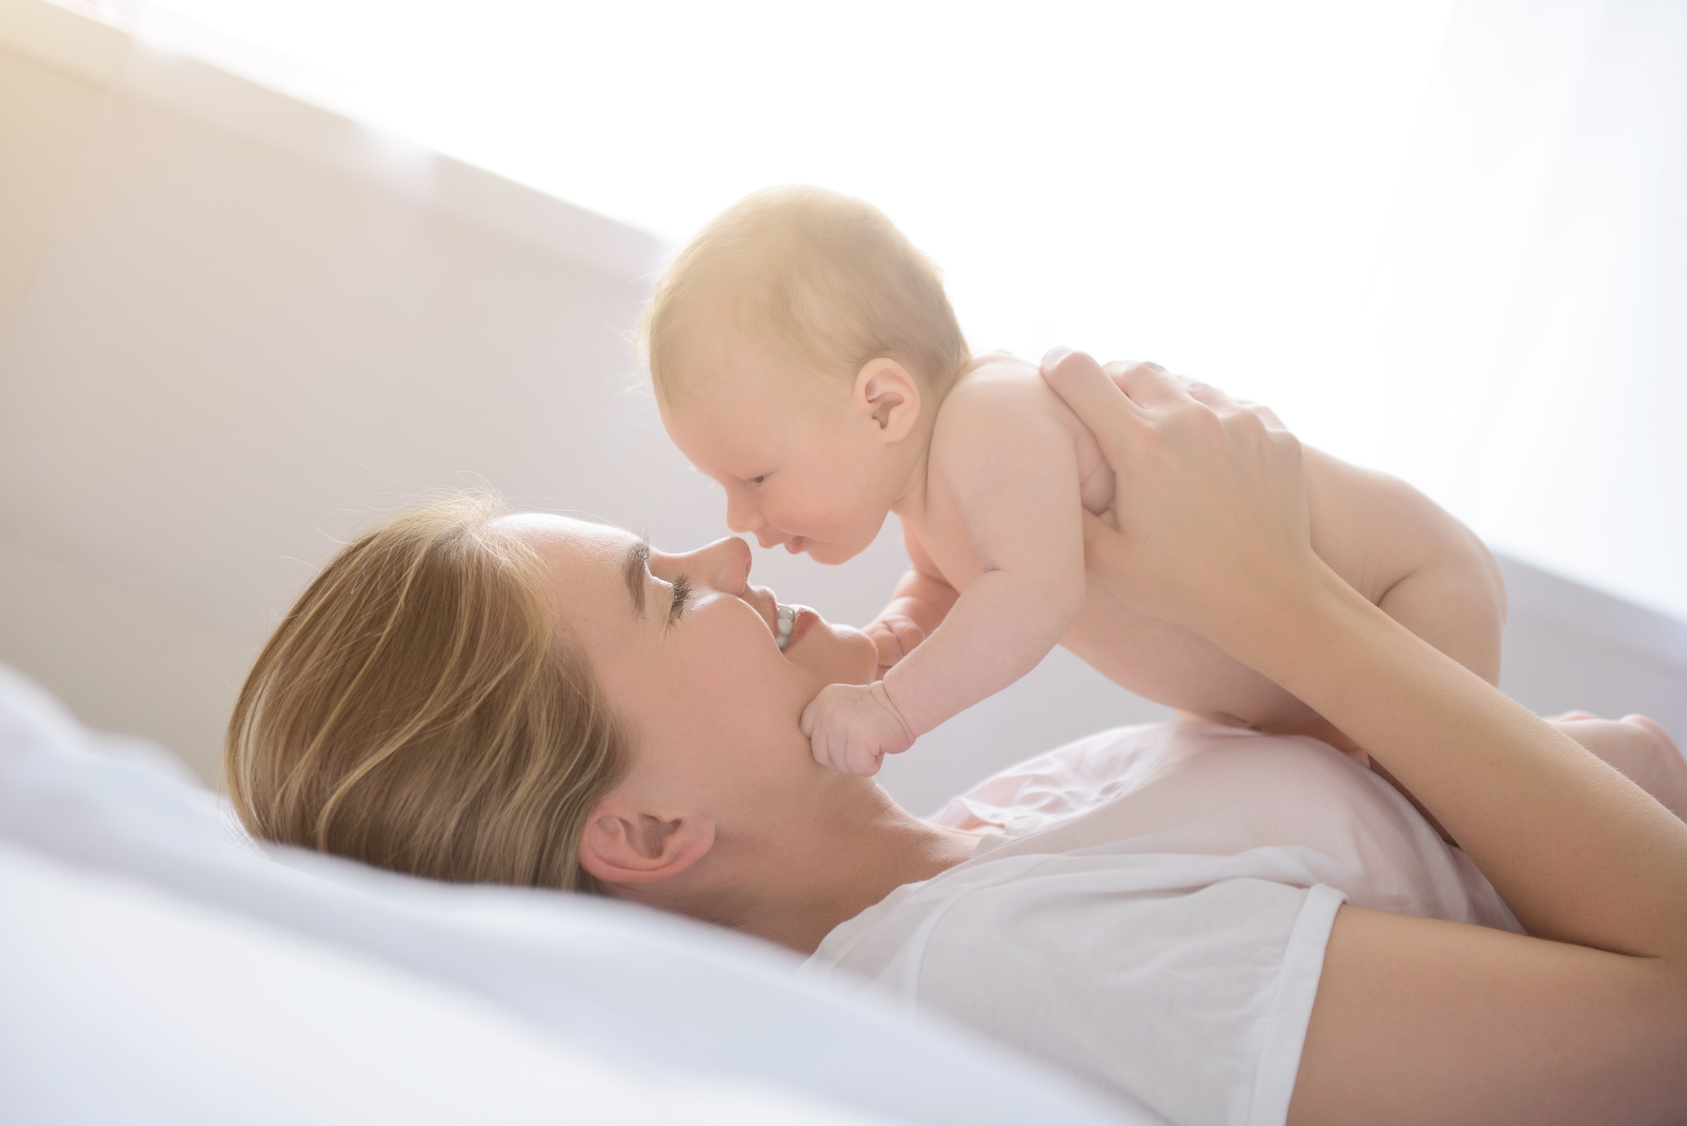 Does Baby-Friendly Have to Be Mom-Unfriendly?